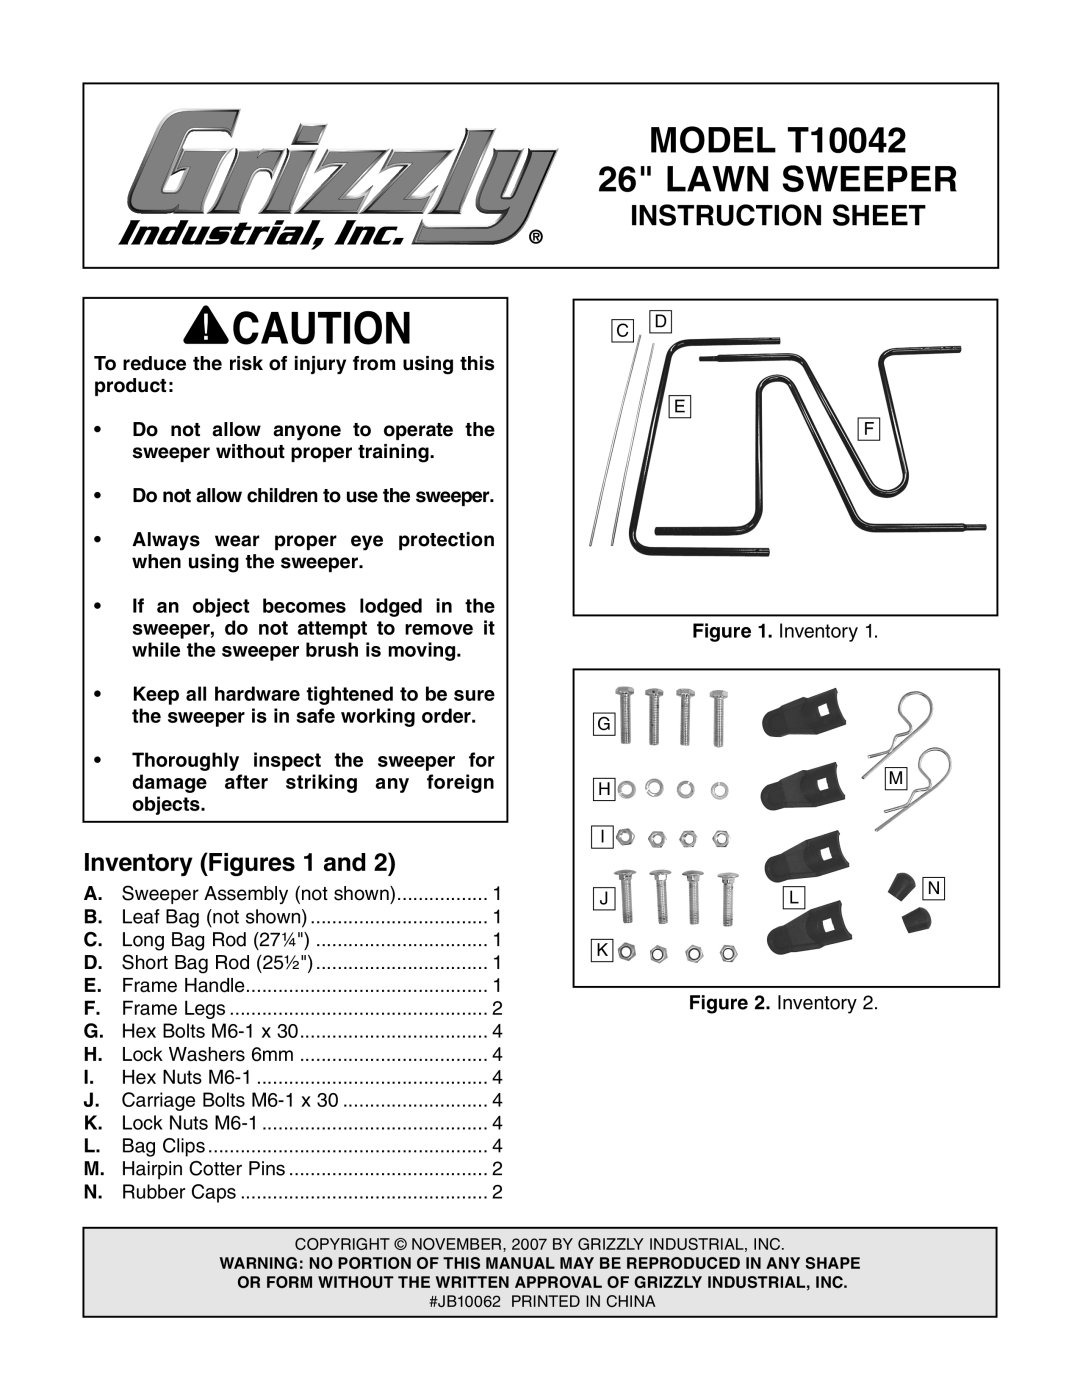 Grizzly instruction sheet Inventory Figures 1 and, MODEL T10042, Lawn Sweeper, Instruction Sheet 